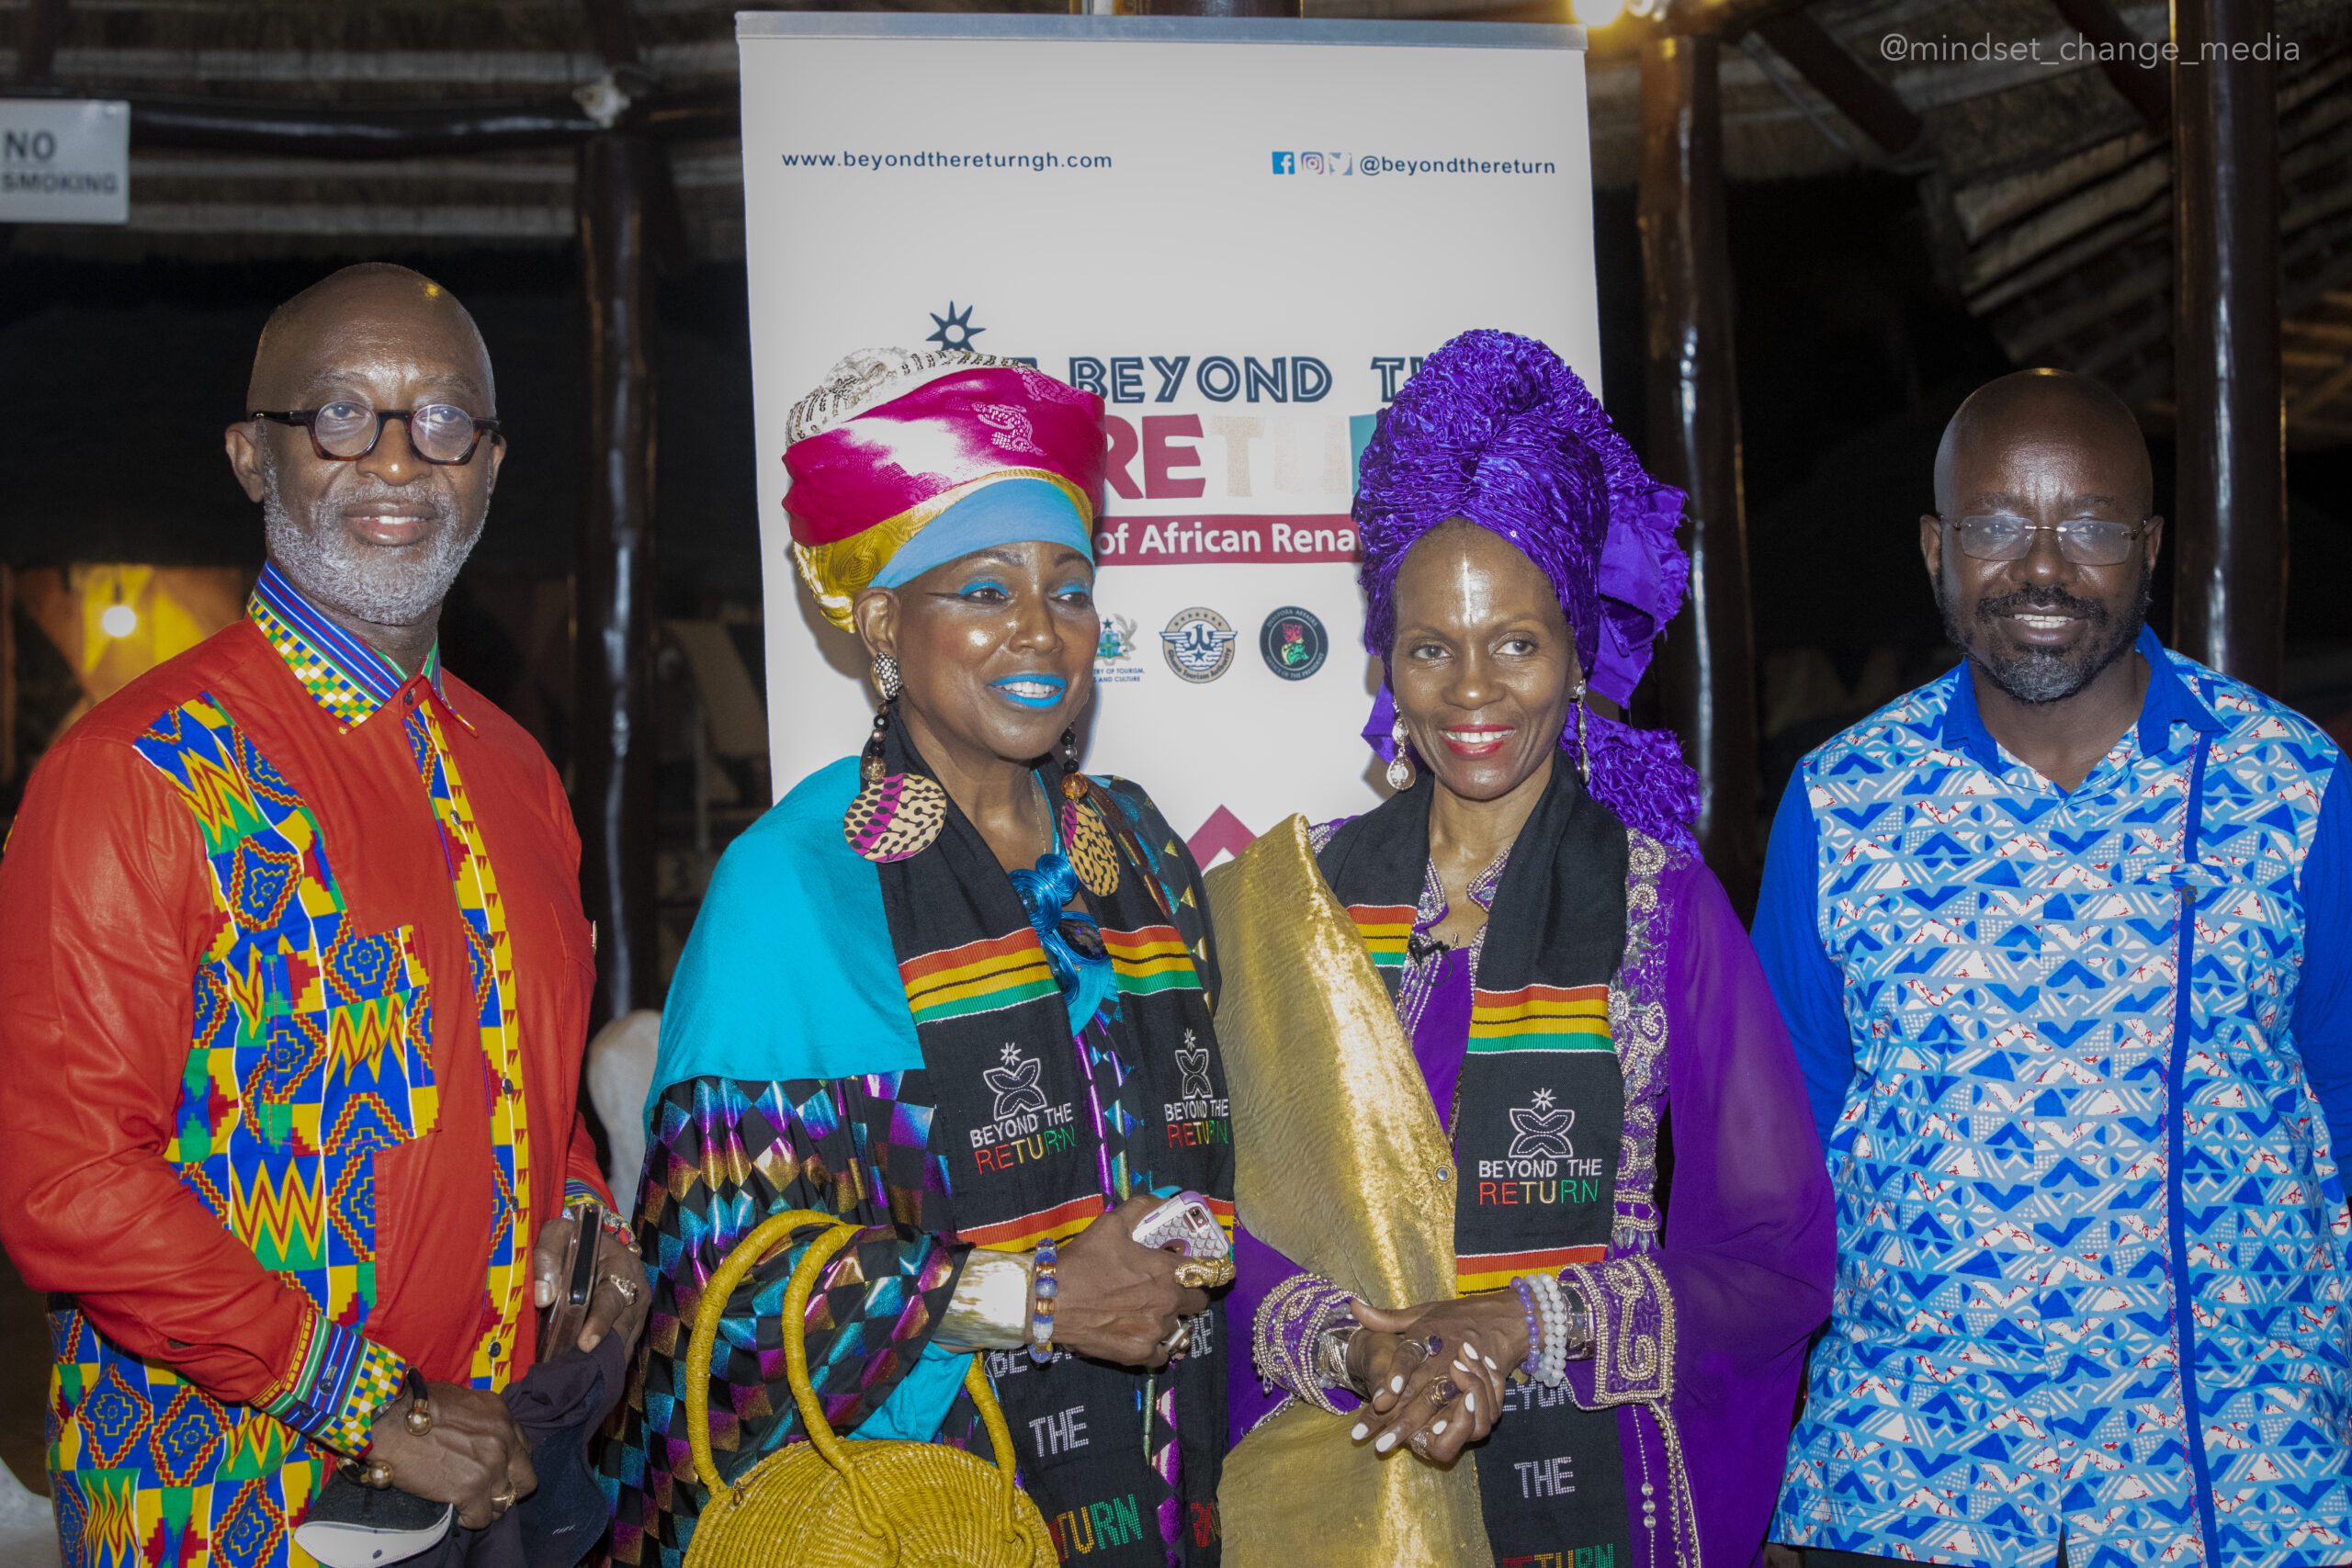 You are currently viewing Beyond the Return, Ghana Tourism Authority Welcome Queen Afua’s Wellness Delegation to Ghana